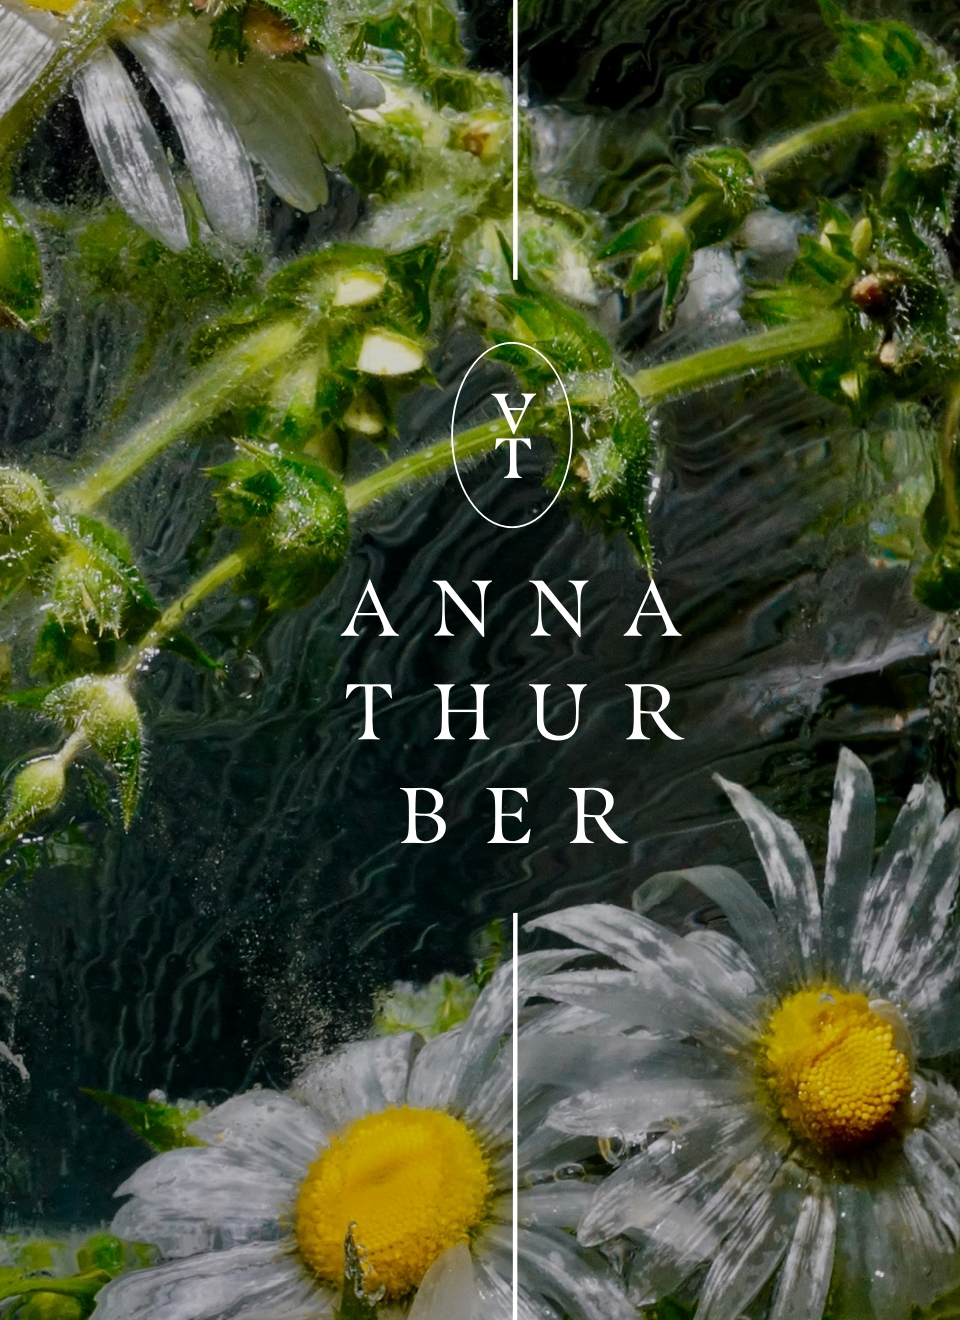 “Anna Thurber” is in between the in and life in “Frozen in Life” and the background is Anna’s Art featuring flora and fauna. The initials AT feature in an oval in the O